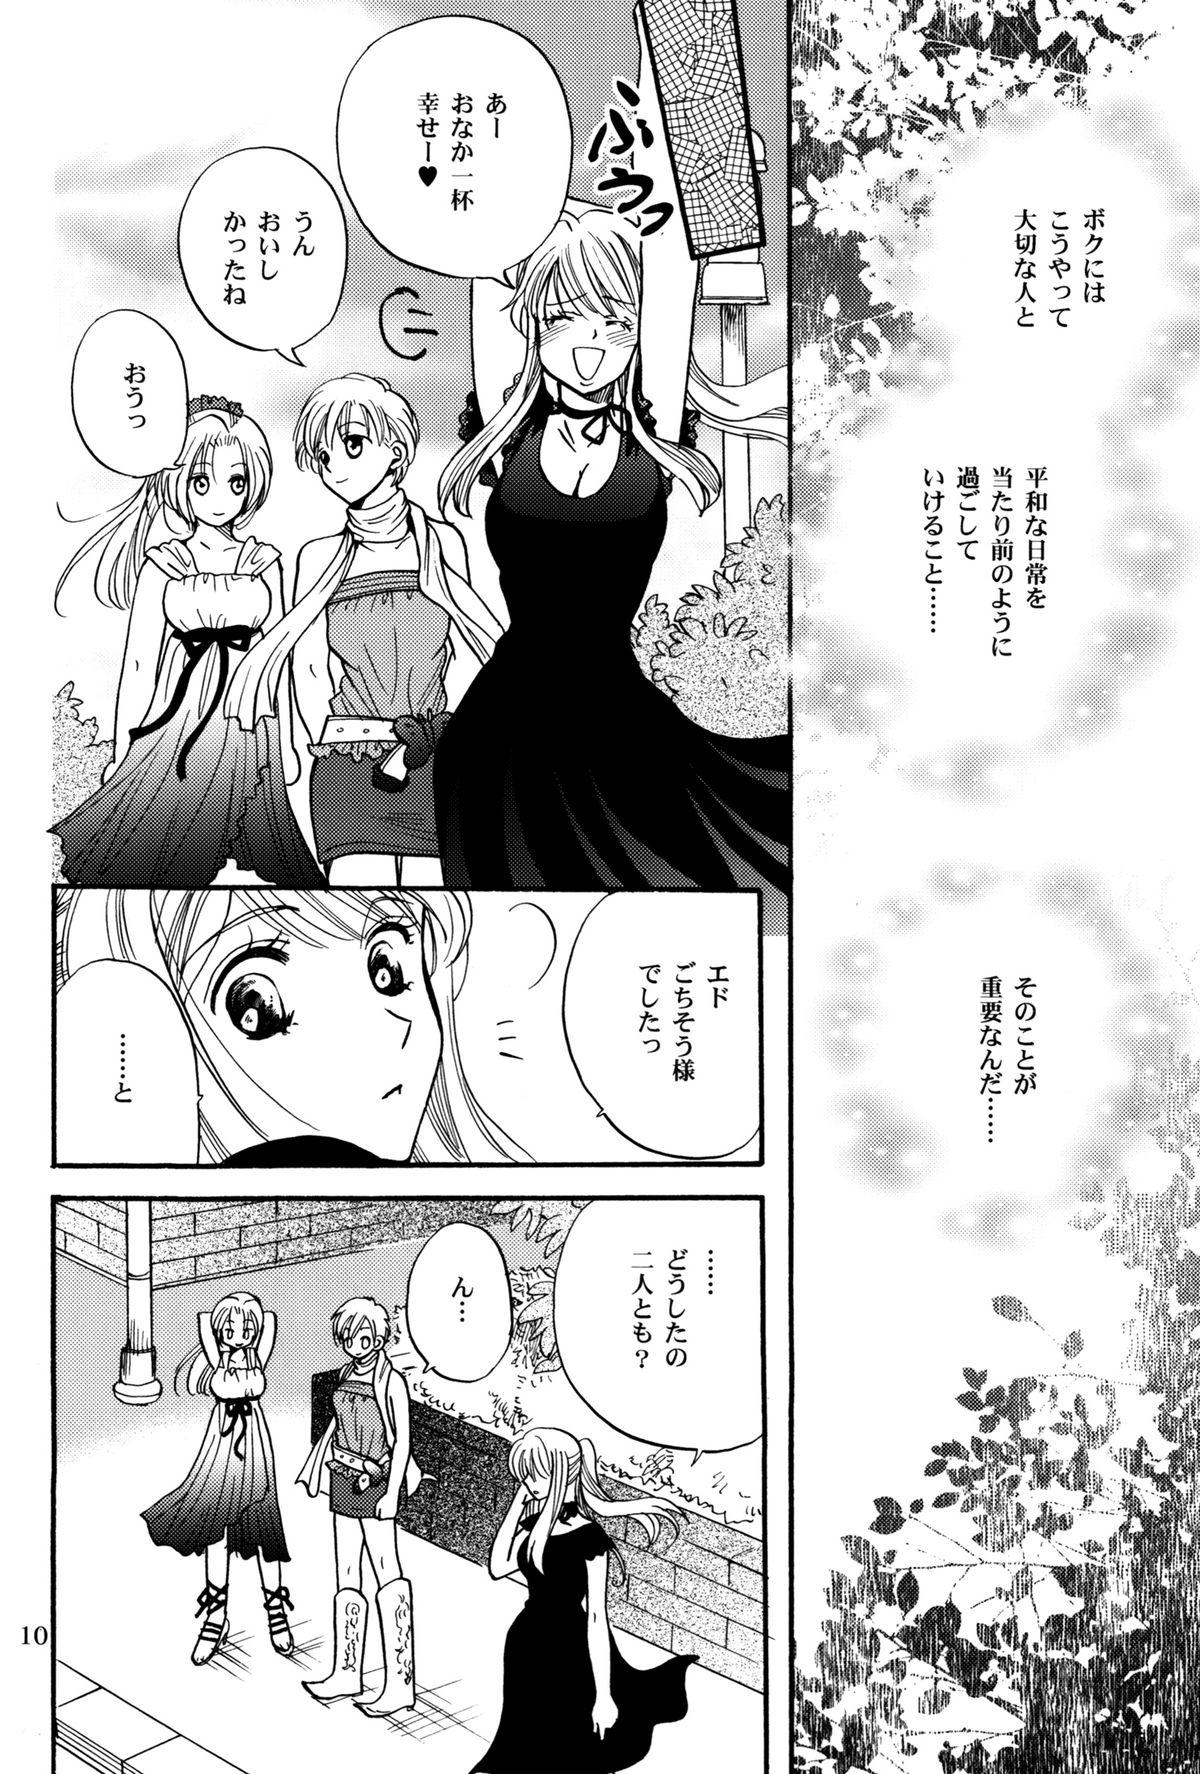 Free Karisome no Girl's Life - Fullmetal alchemist Awesome - Page 10